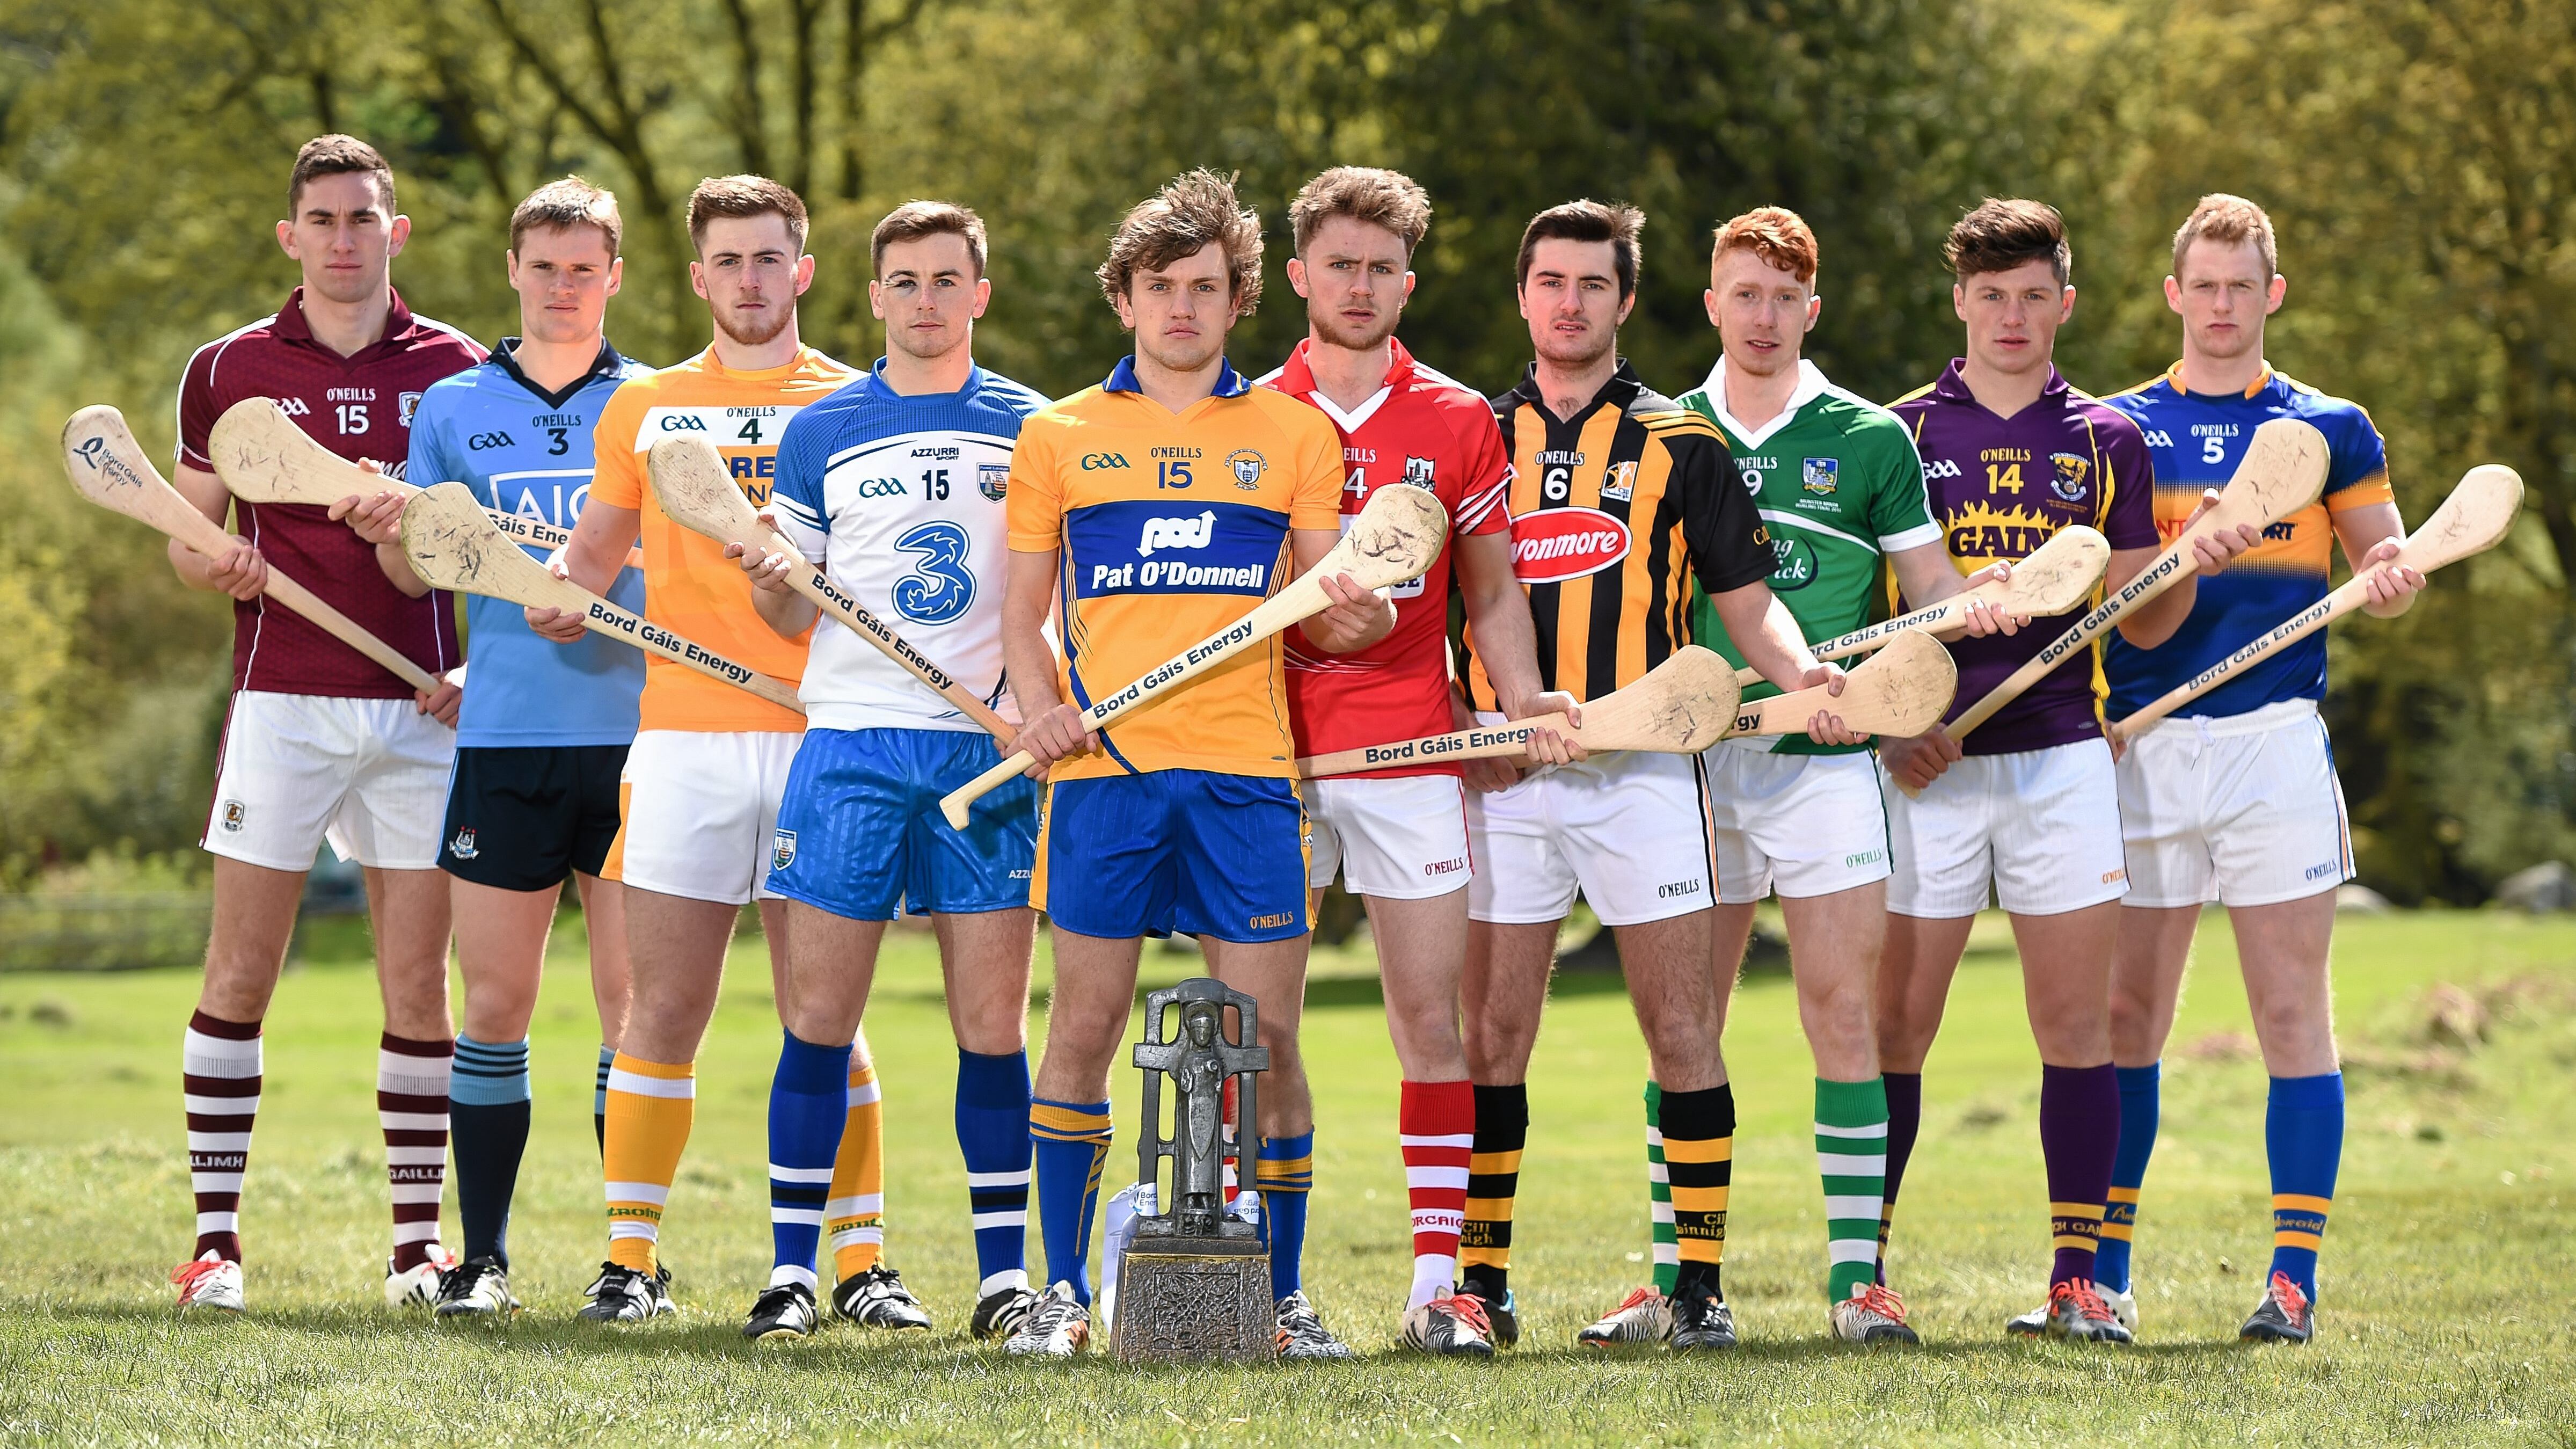 <span style="font-family: Arial, Verdana, sans-serif; ">One of the U21 hurling captains on show will guide their side to glory this summer</span>&nbsp;